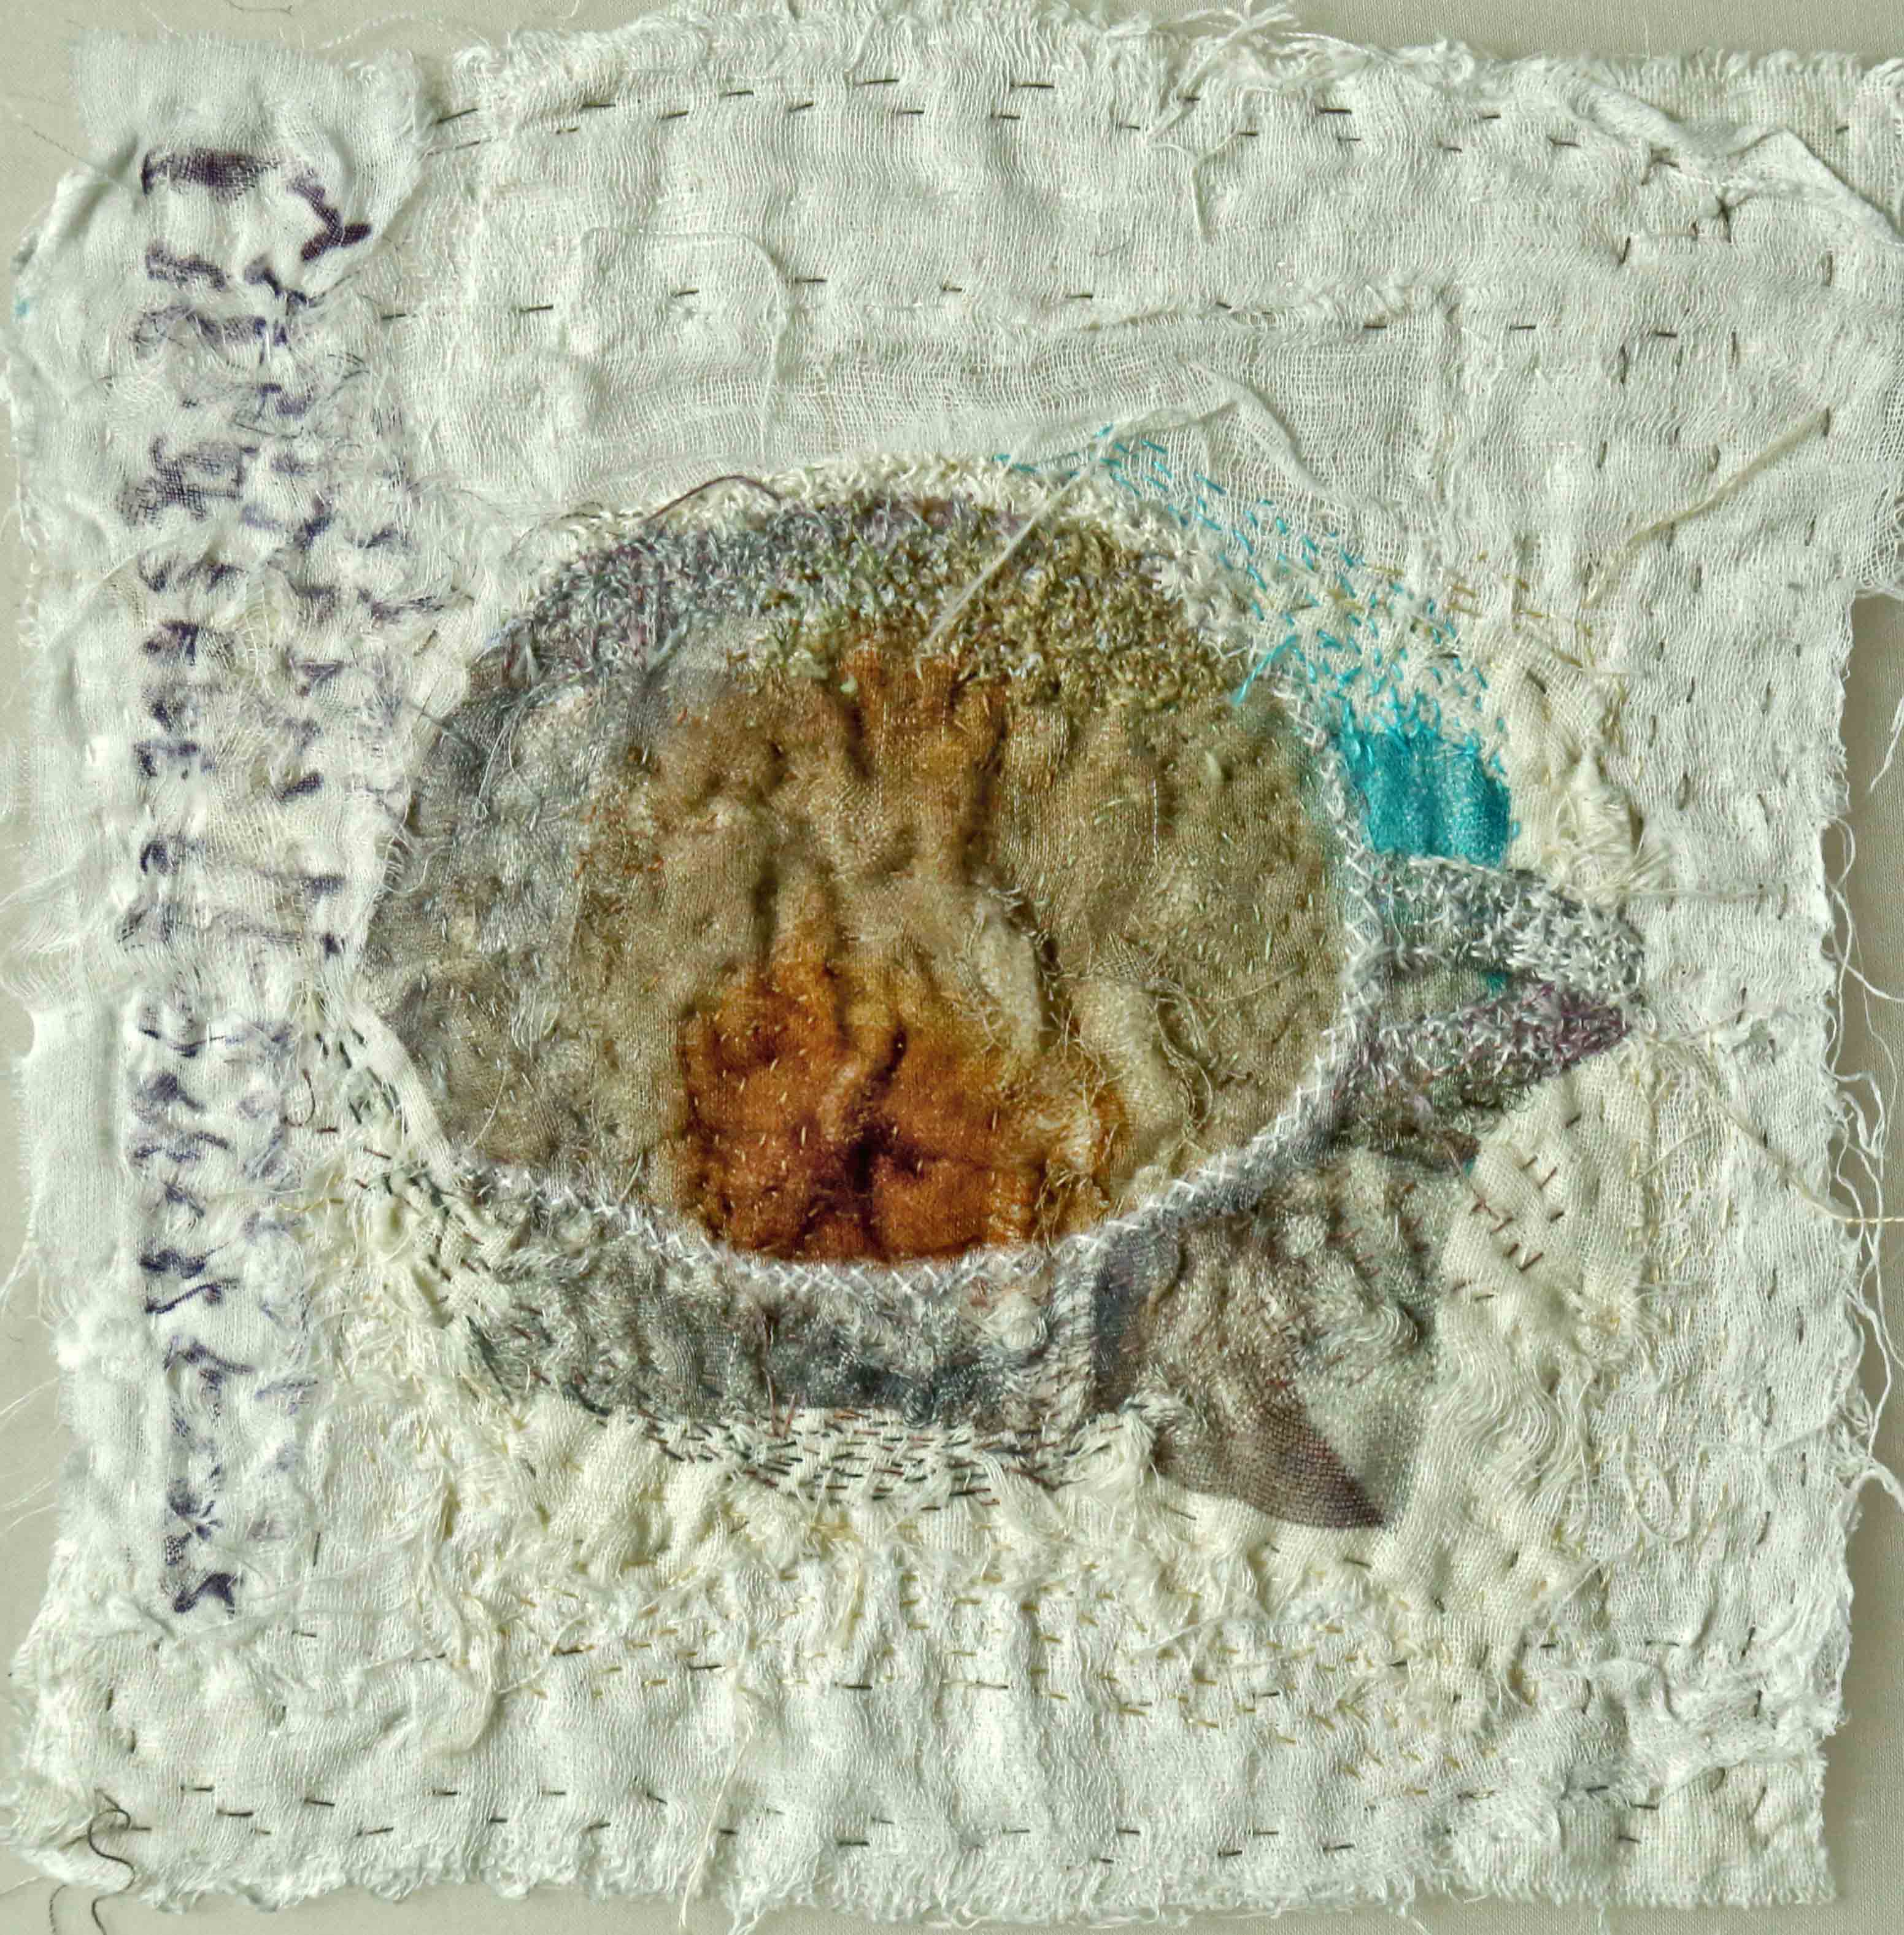 Dregs in Your Tea-cup II, 2010 [7 X 6 Inches - unframed] Materials: cotton voile, cotton floss, cotton-polyester thread, Technique: photography, digital printing, tearing, layering, stitching, embroidery